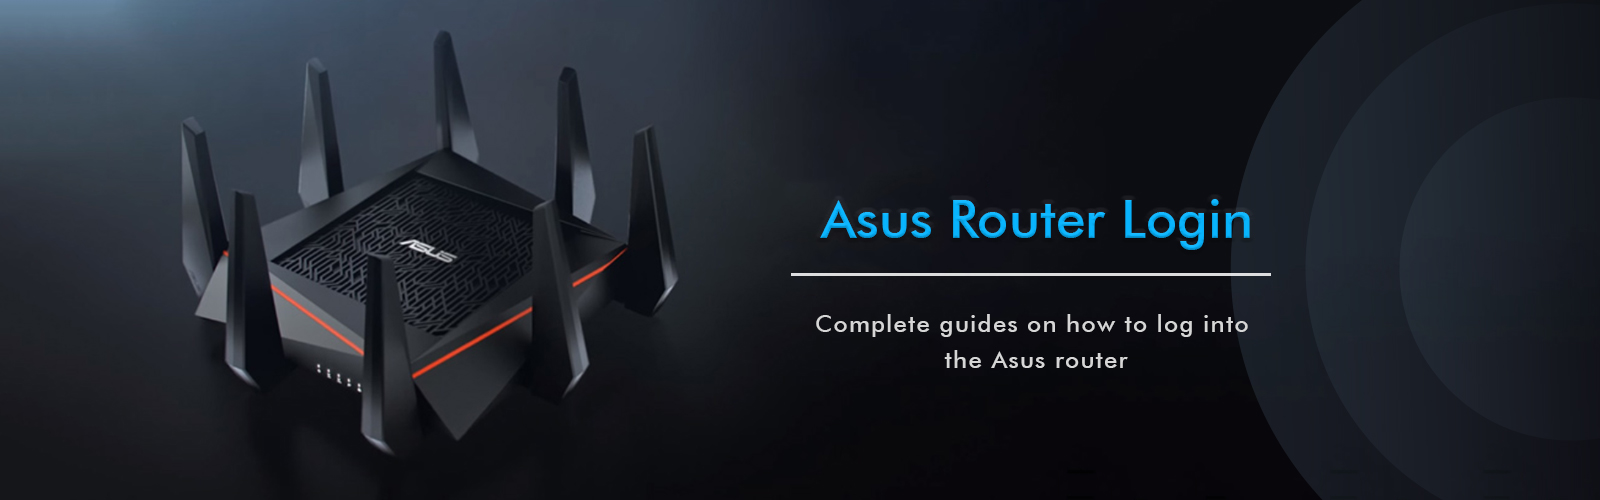 router.asus.com | asus router login | How to Install Asus router